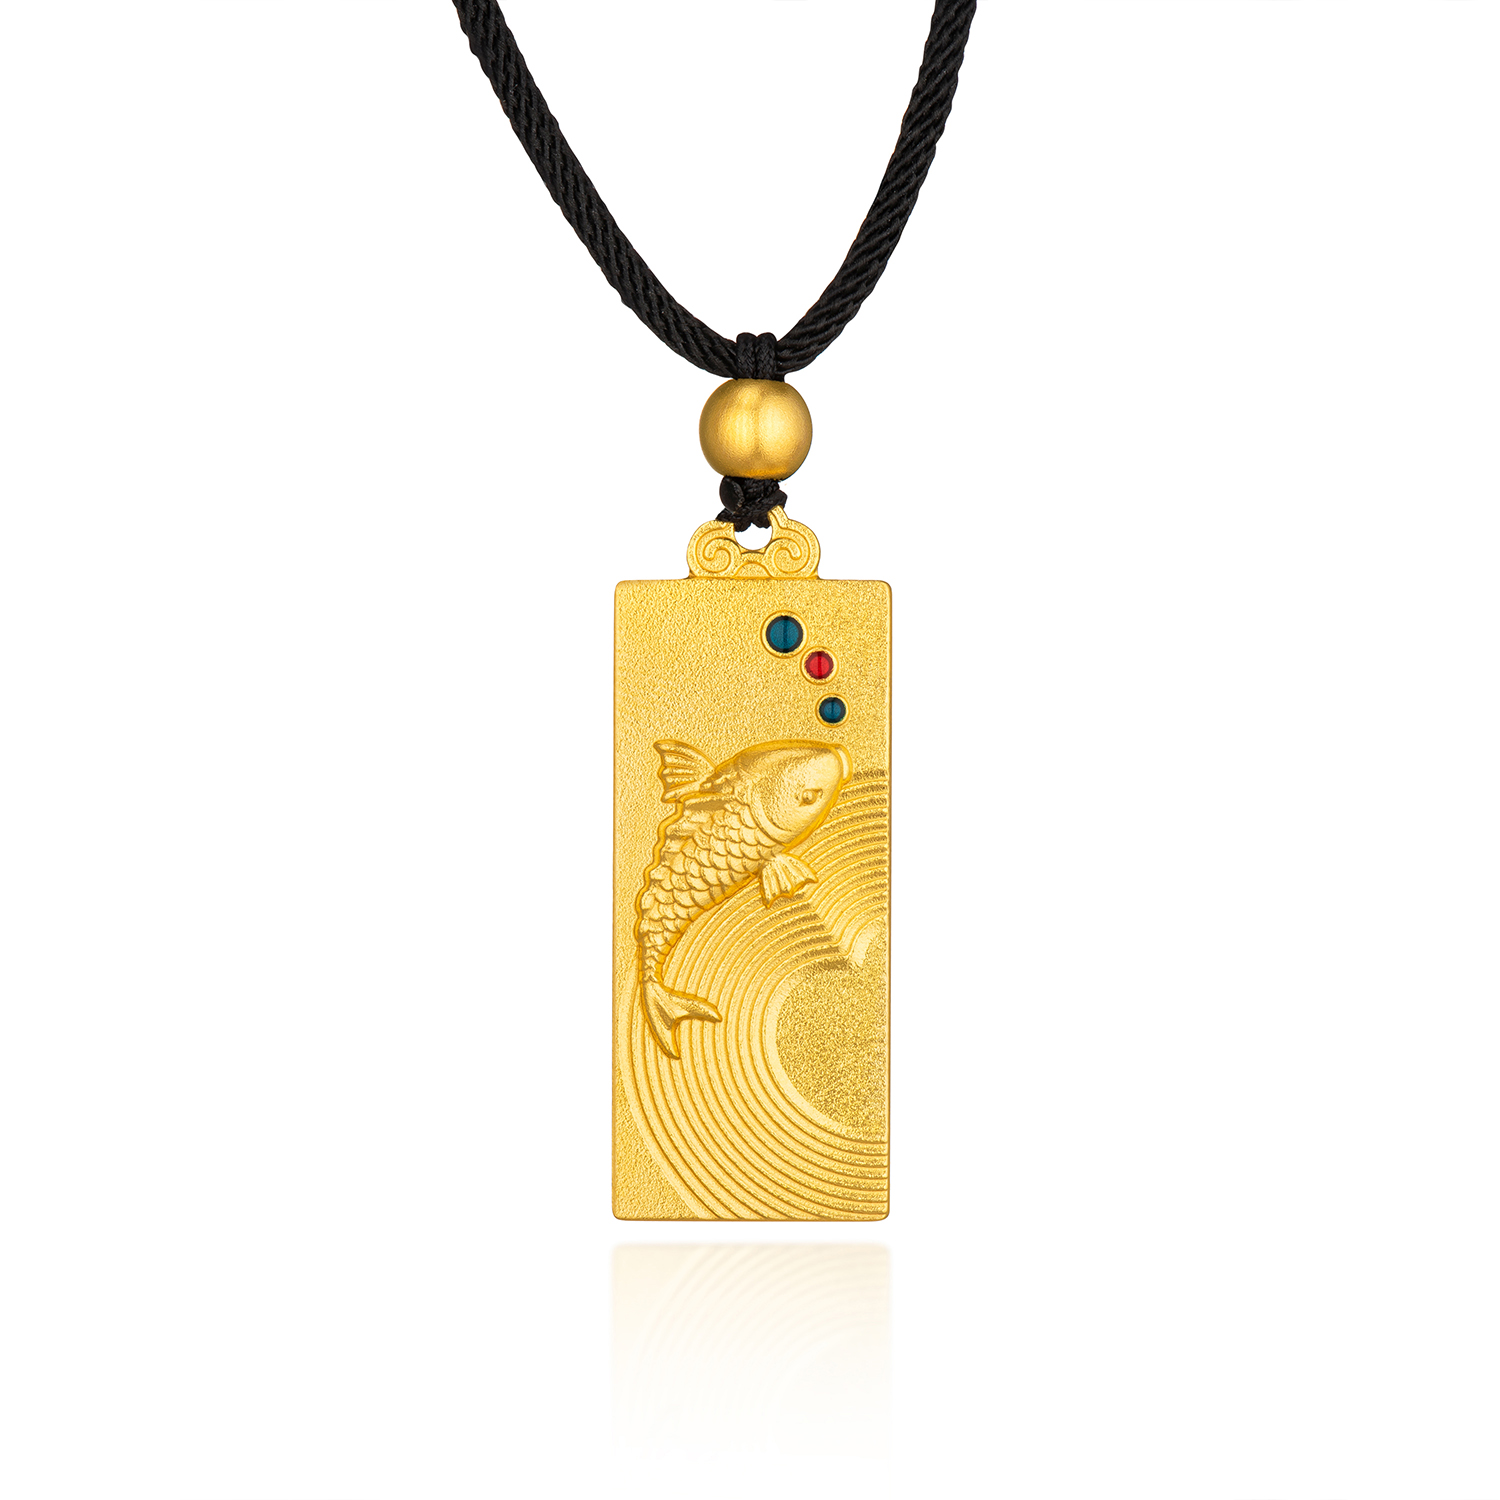 Heirloom Fortune Collection “Endless Fortune” Gold Couple Necklace For Men